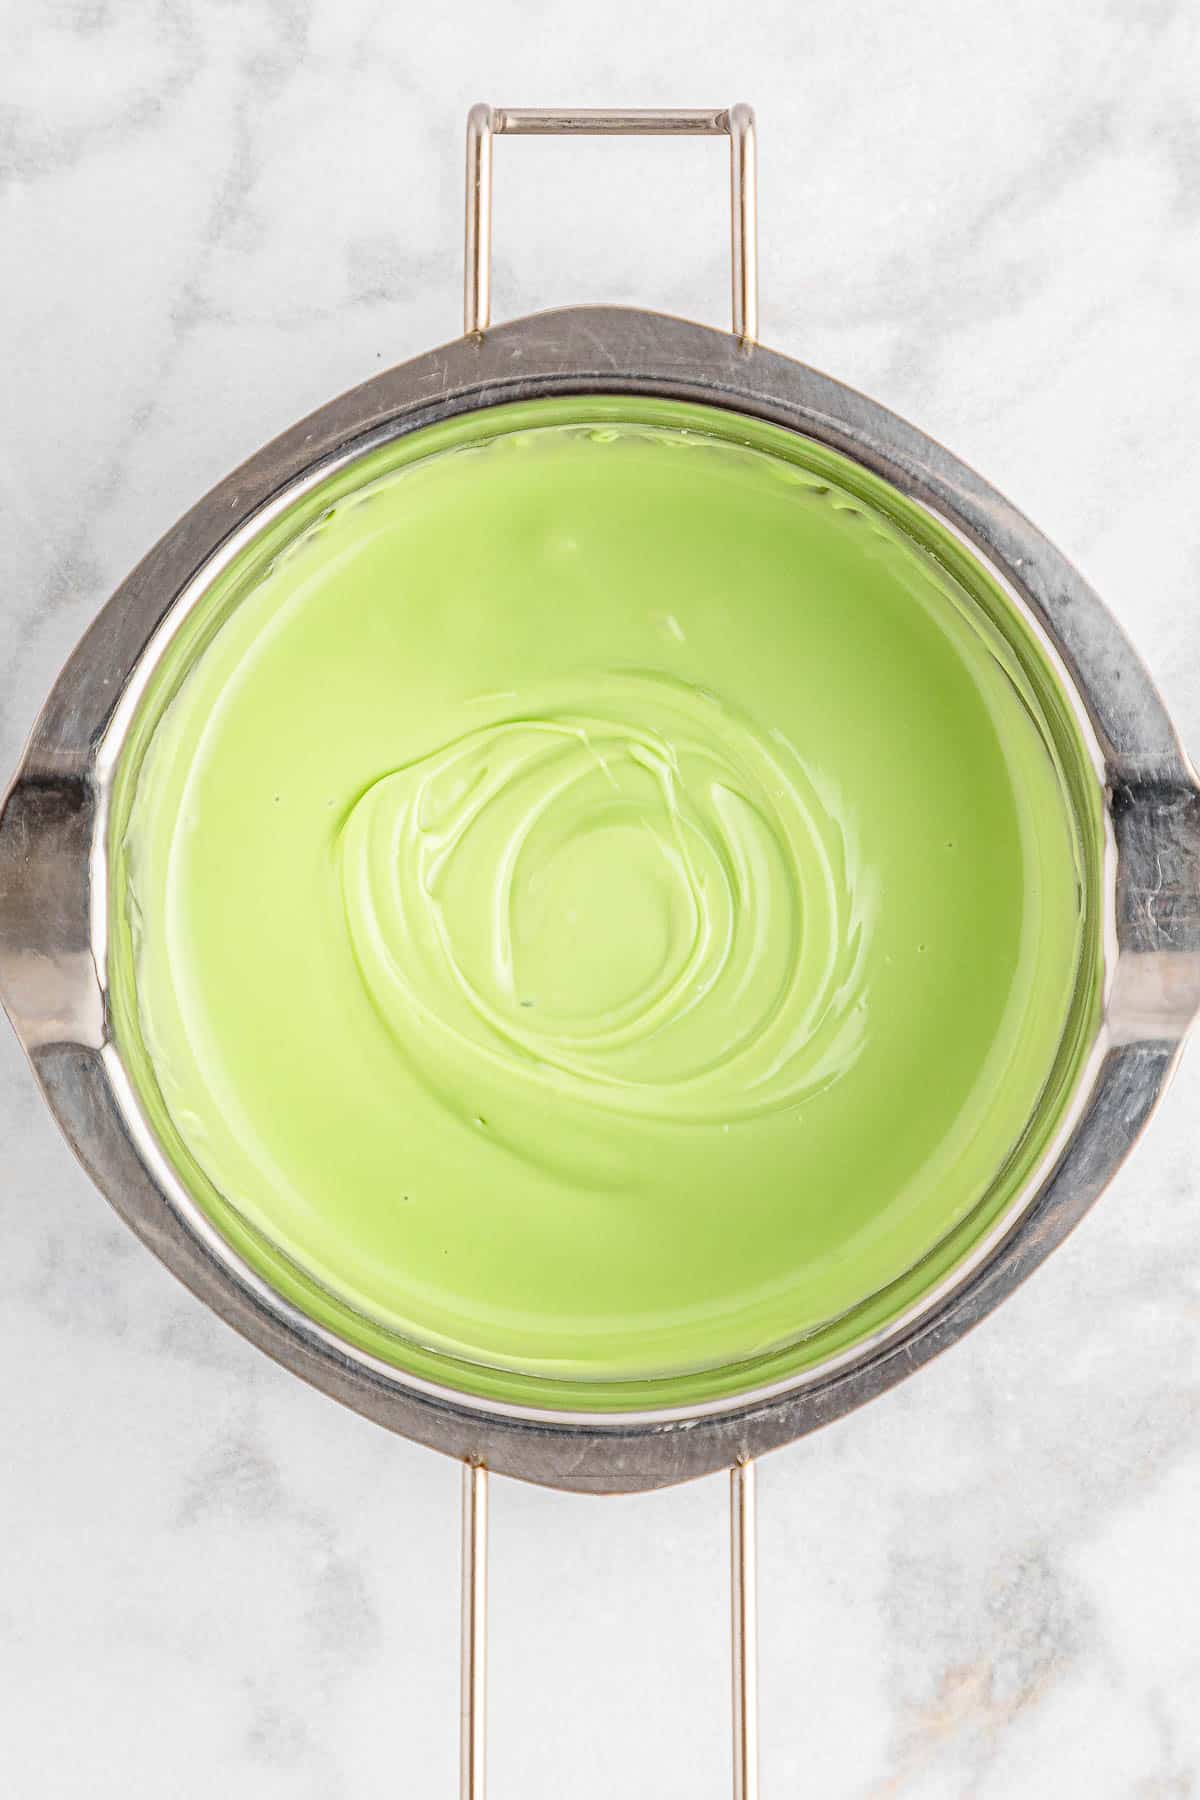 A bowl of melted green candy melt.